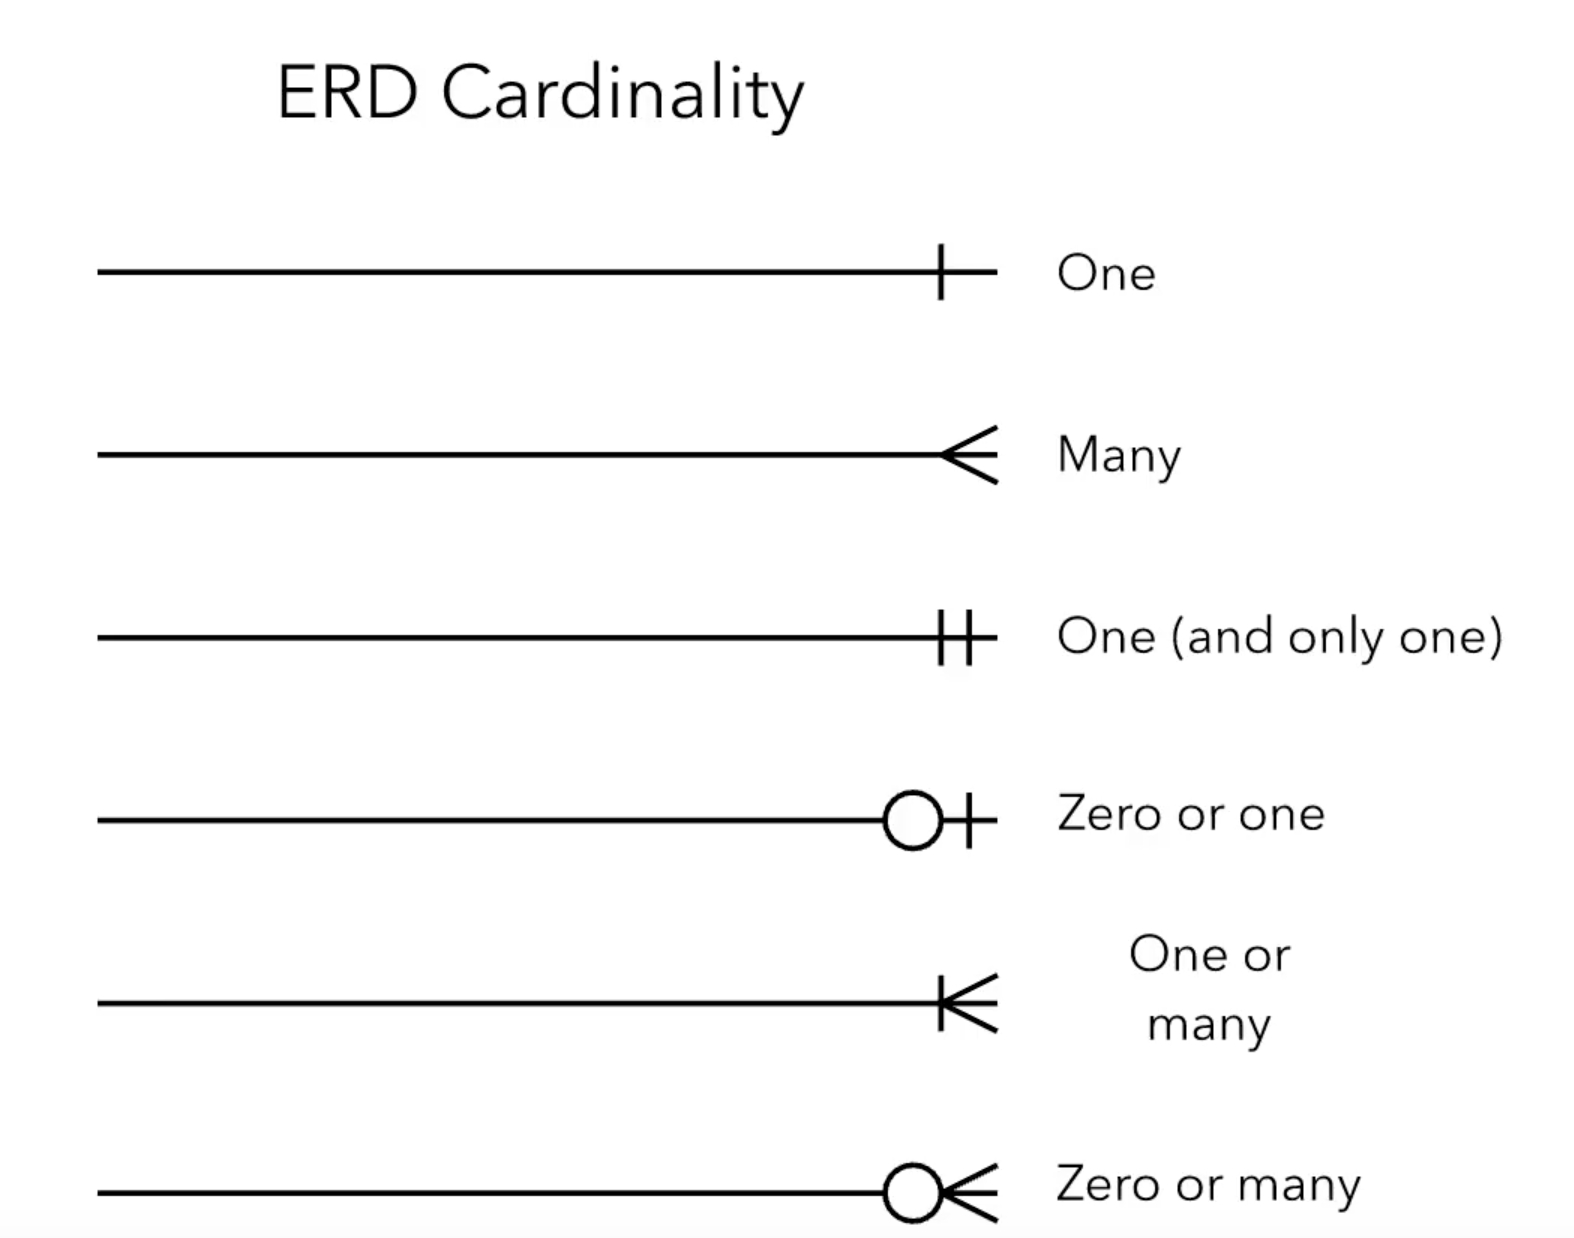 Er Diagram - Are The Relations And Cardinalities Correct intended for Er Diagram Exactly One